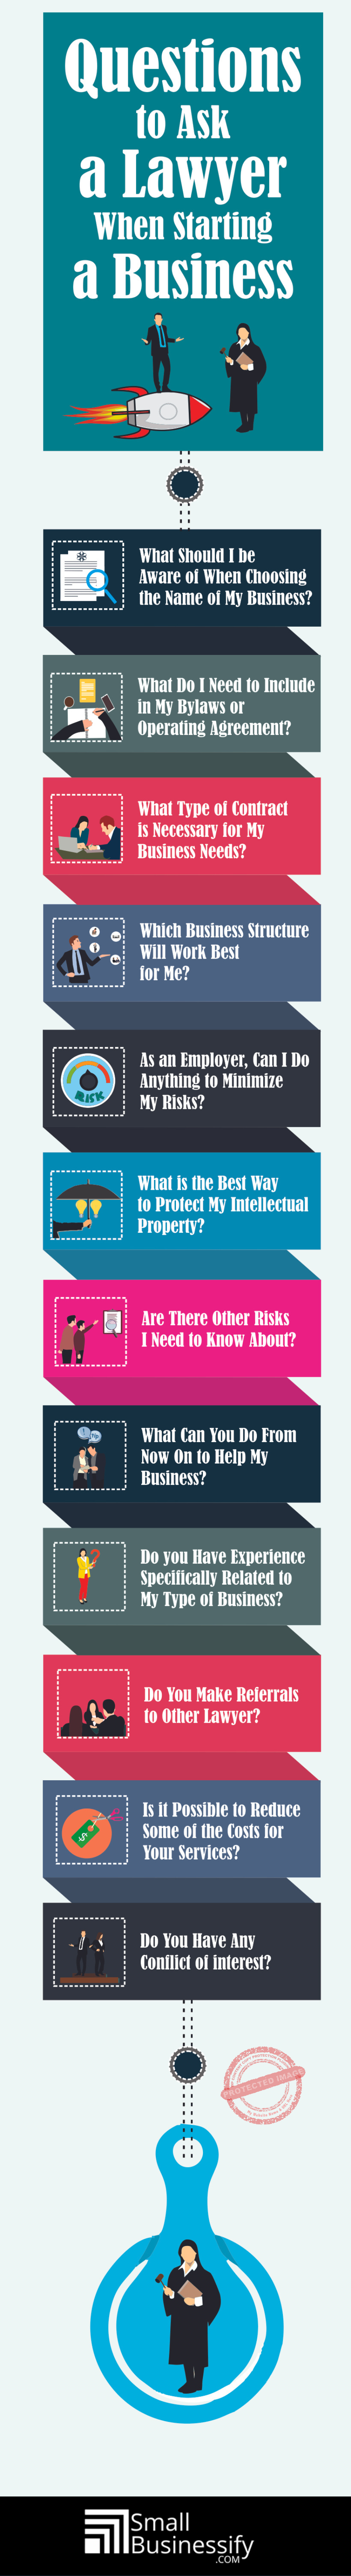 Questions to ask a lawyer when starting a business infographic